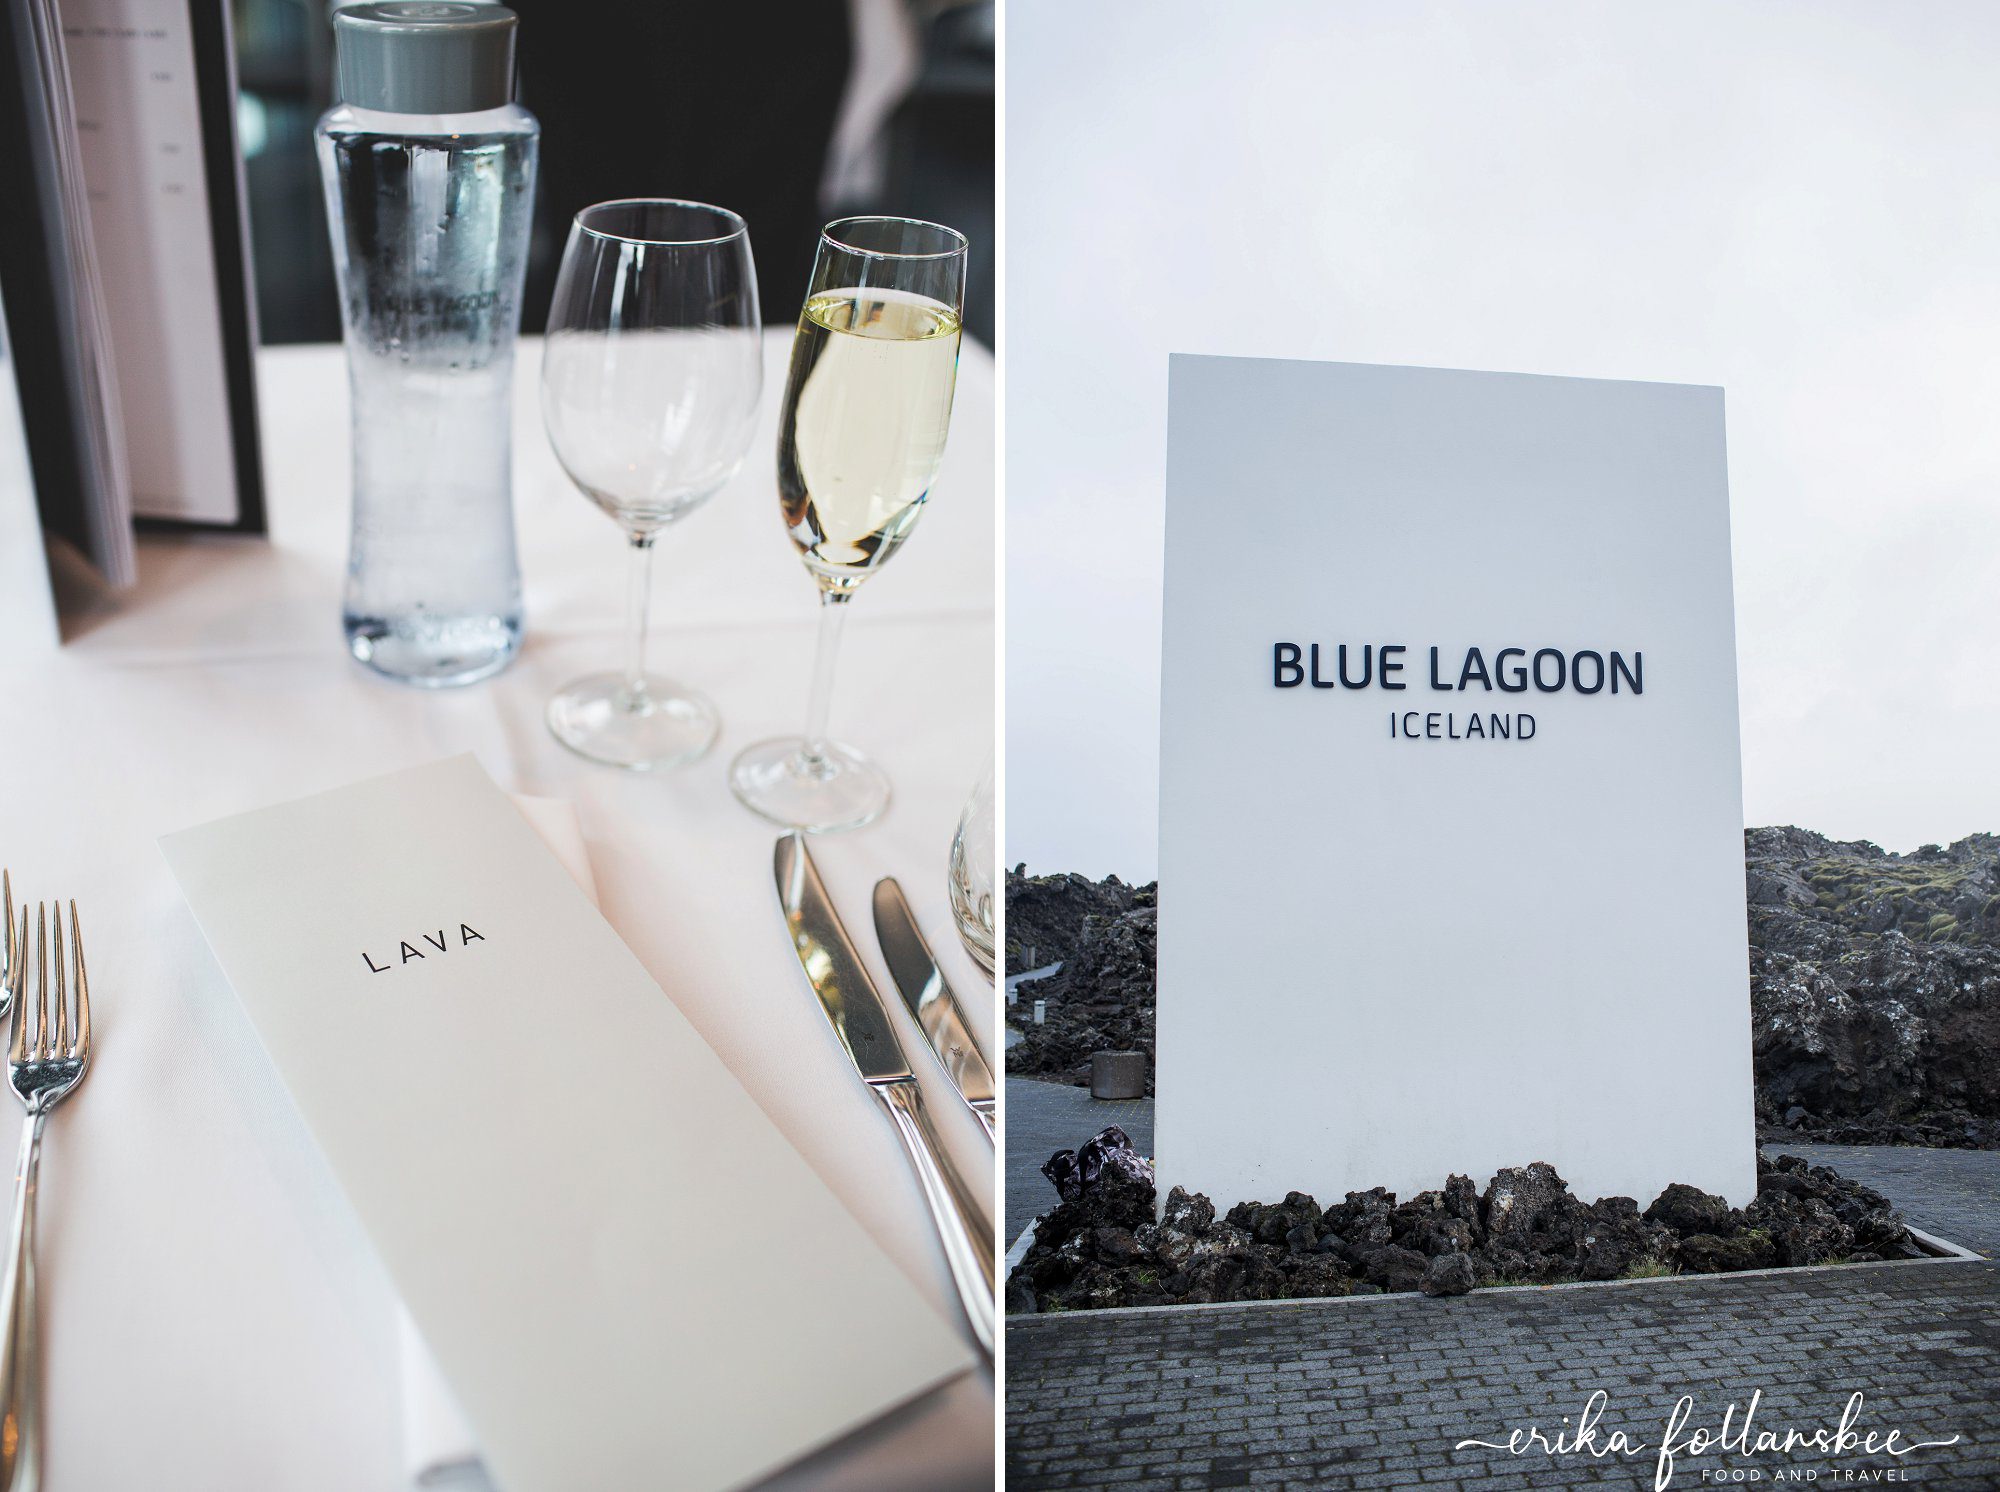 3-course lunch at the Blue Lagoon's LAVA restaurant